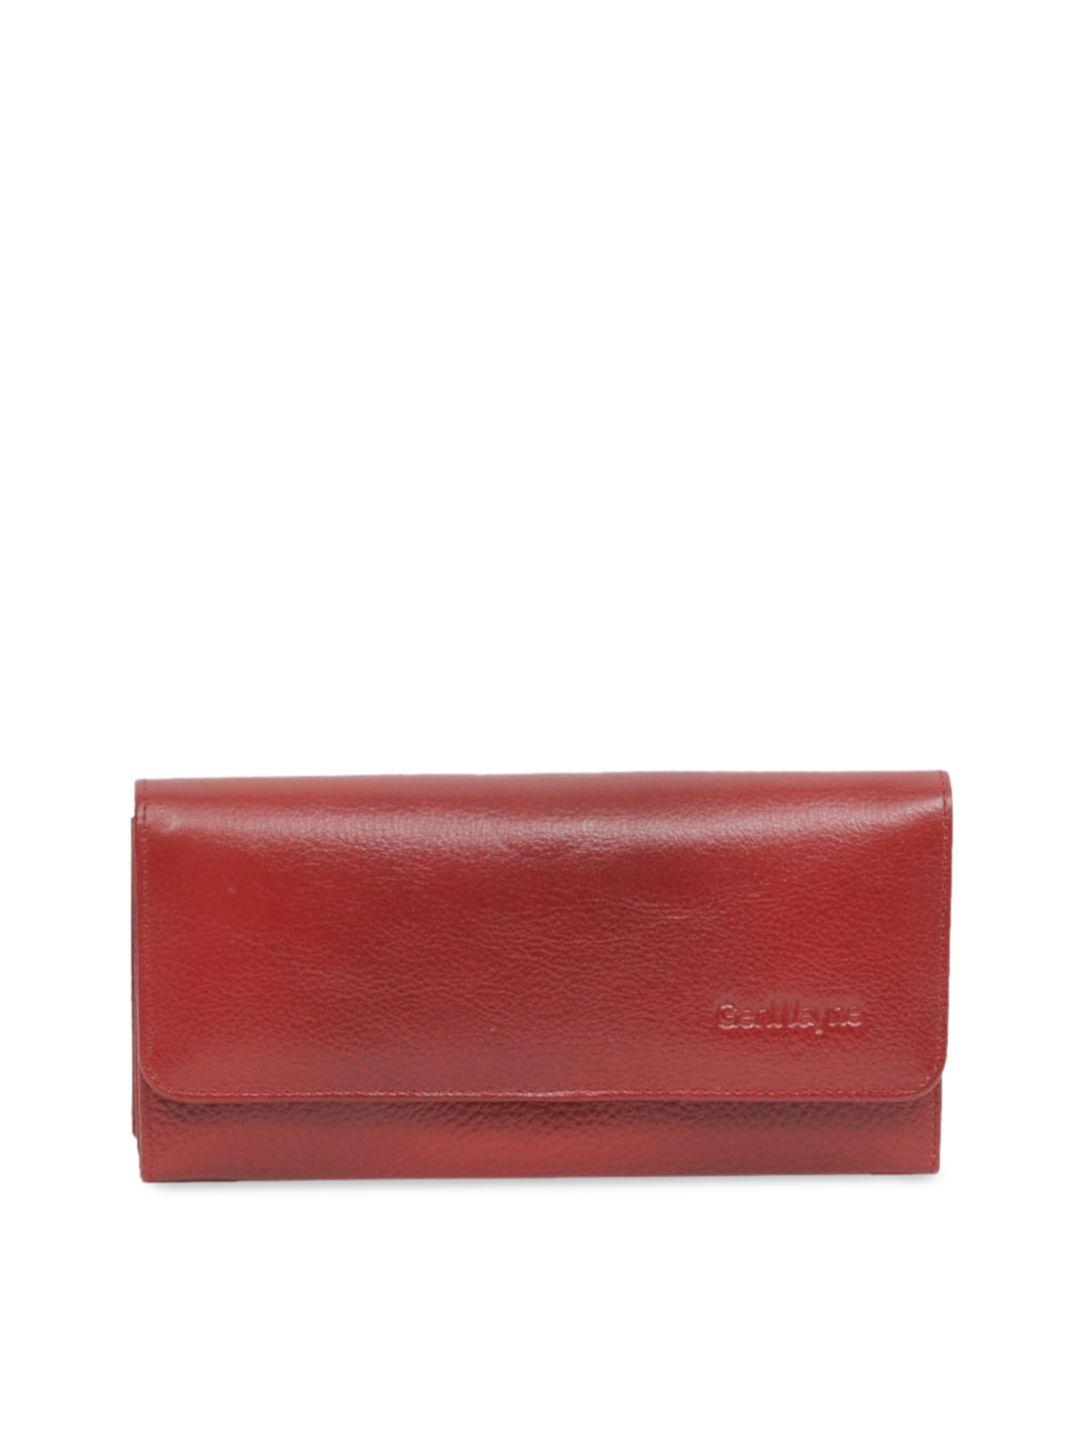 genwayne red solid leather envelope clutches